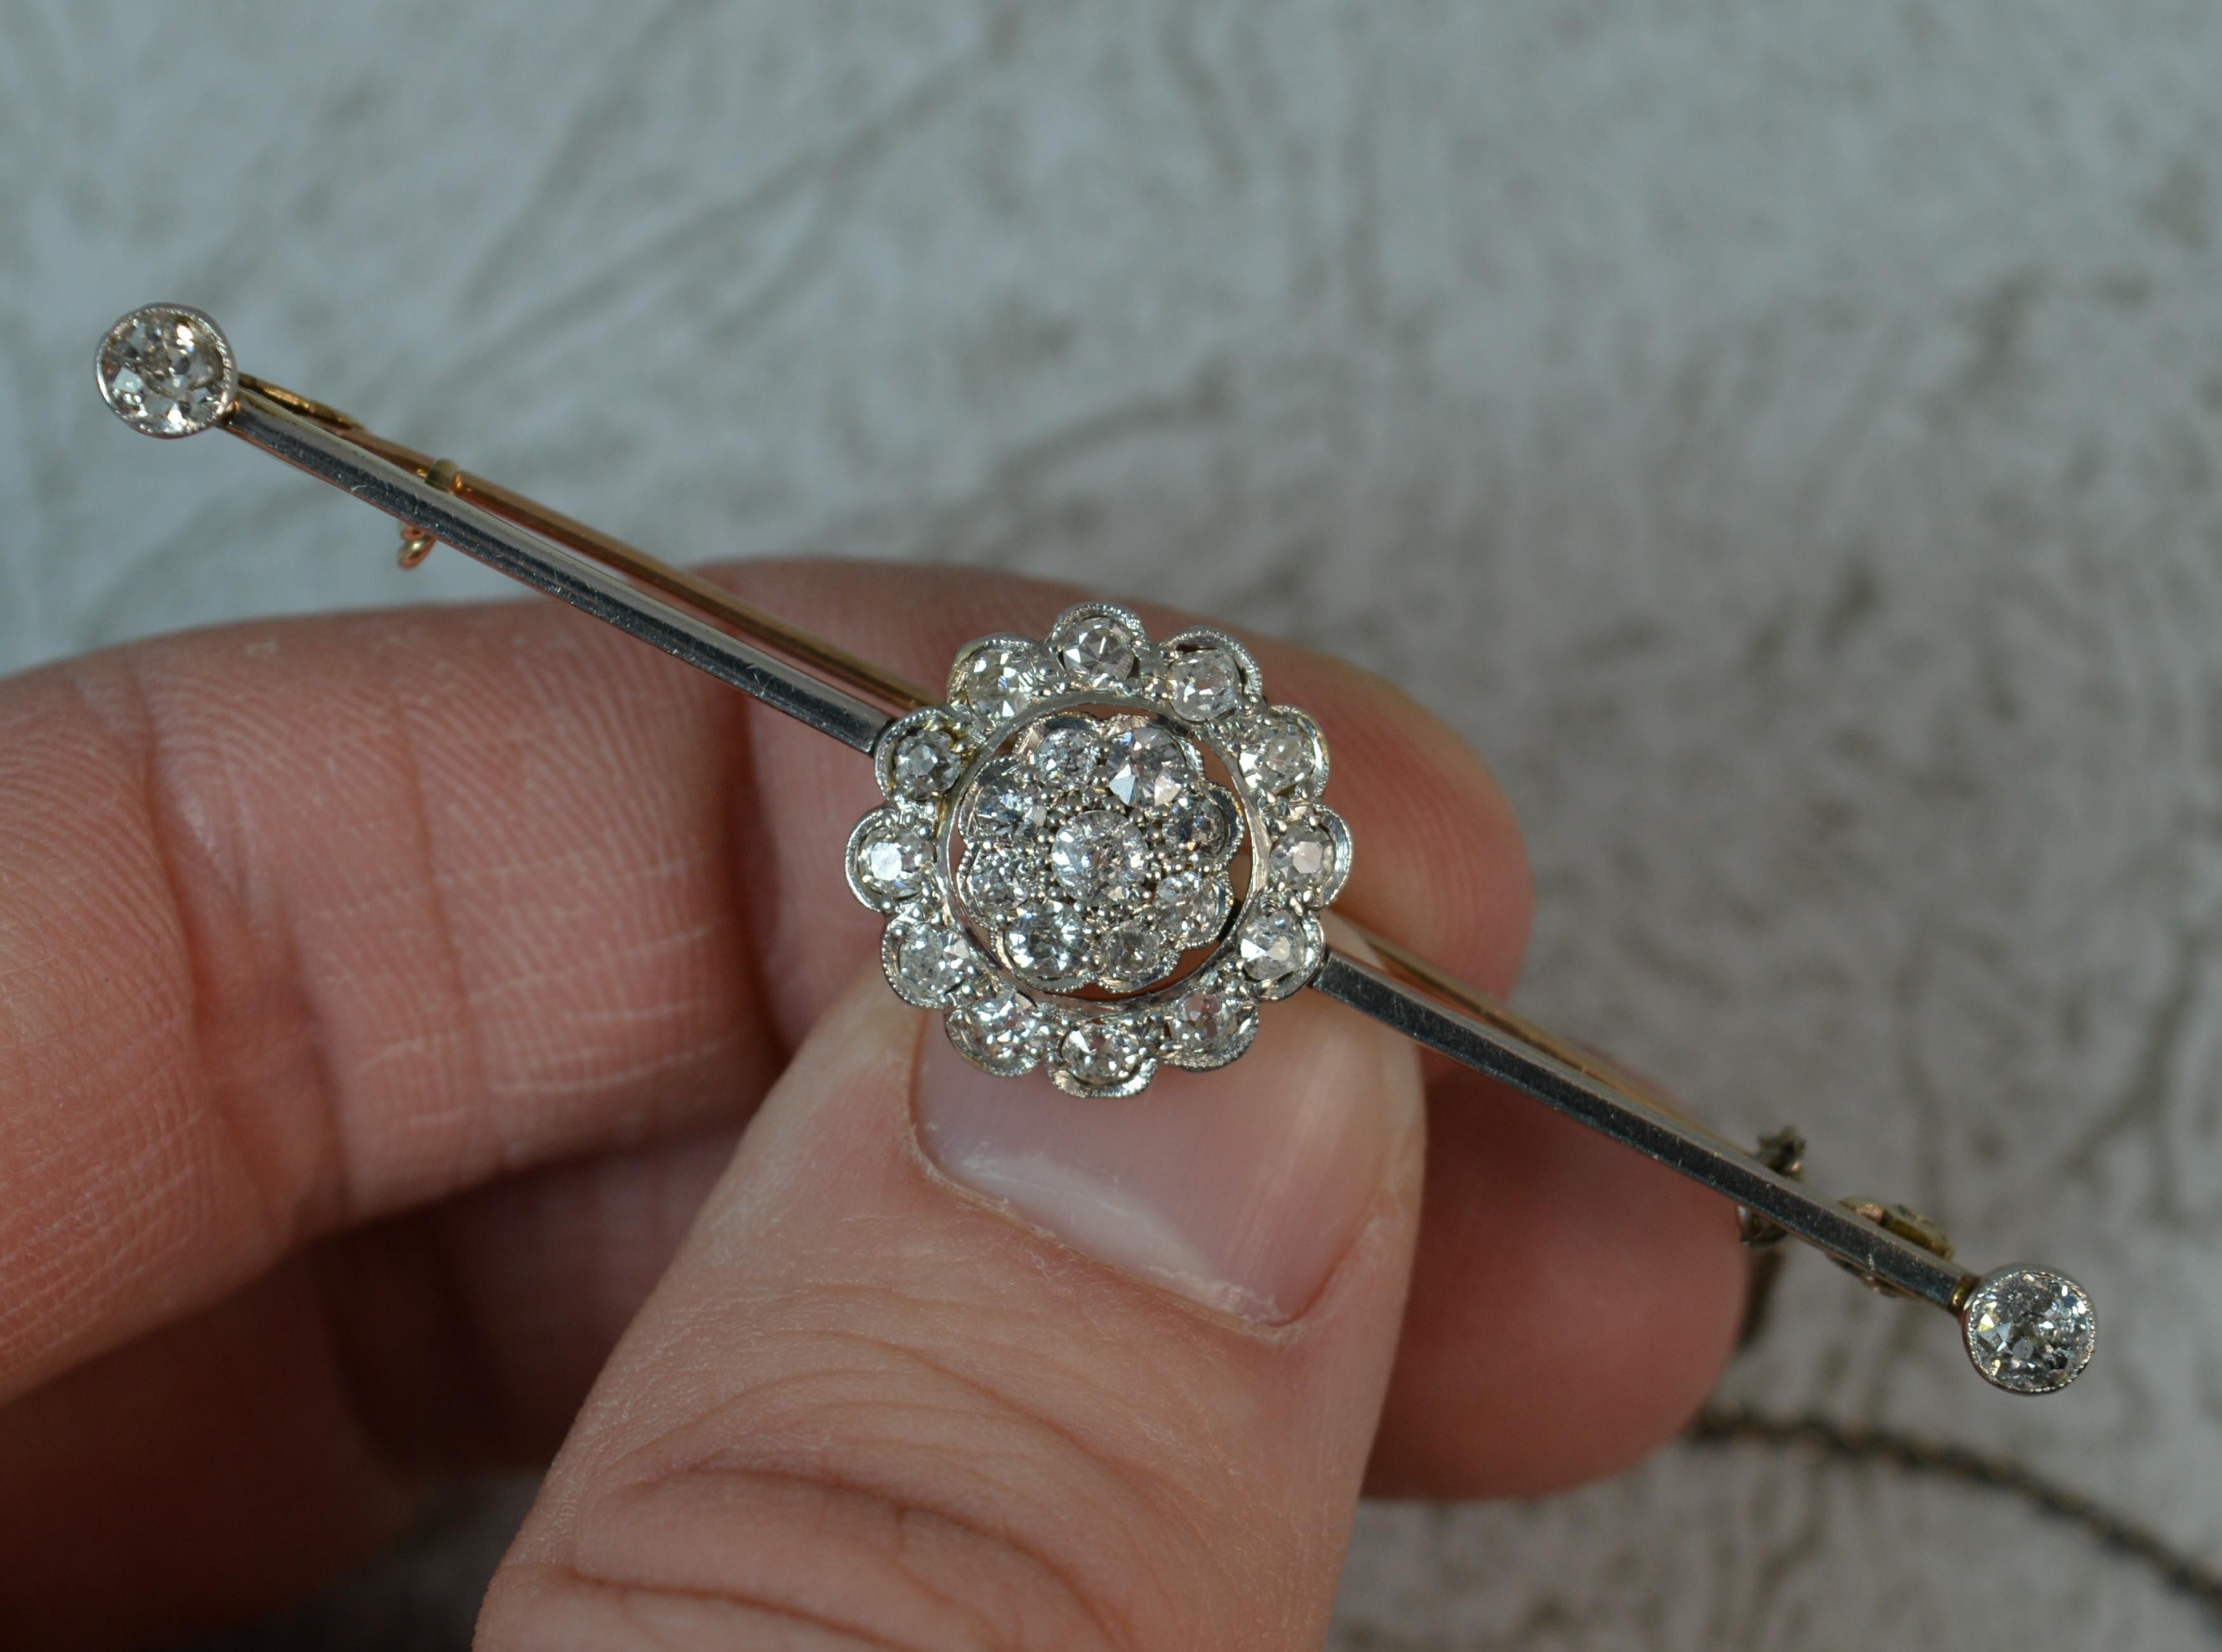 A beautiful Victorian period brooch.
Solid 18 carat yellow gold example with platinum front to bar and settings.
Designed with a three tier flower cluster set with old cut diamonds in grain bezel settings. Complete with a single bar to each side and